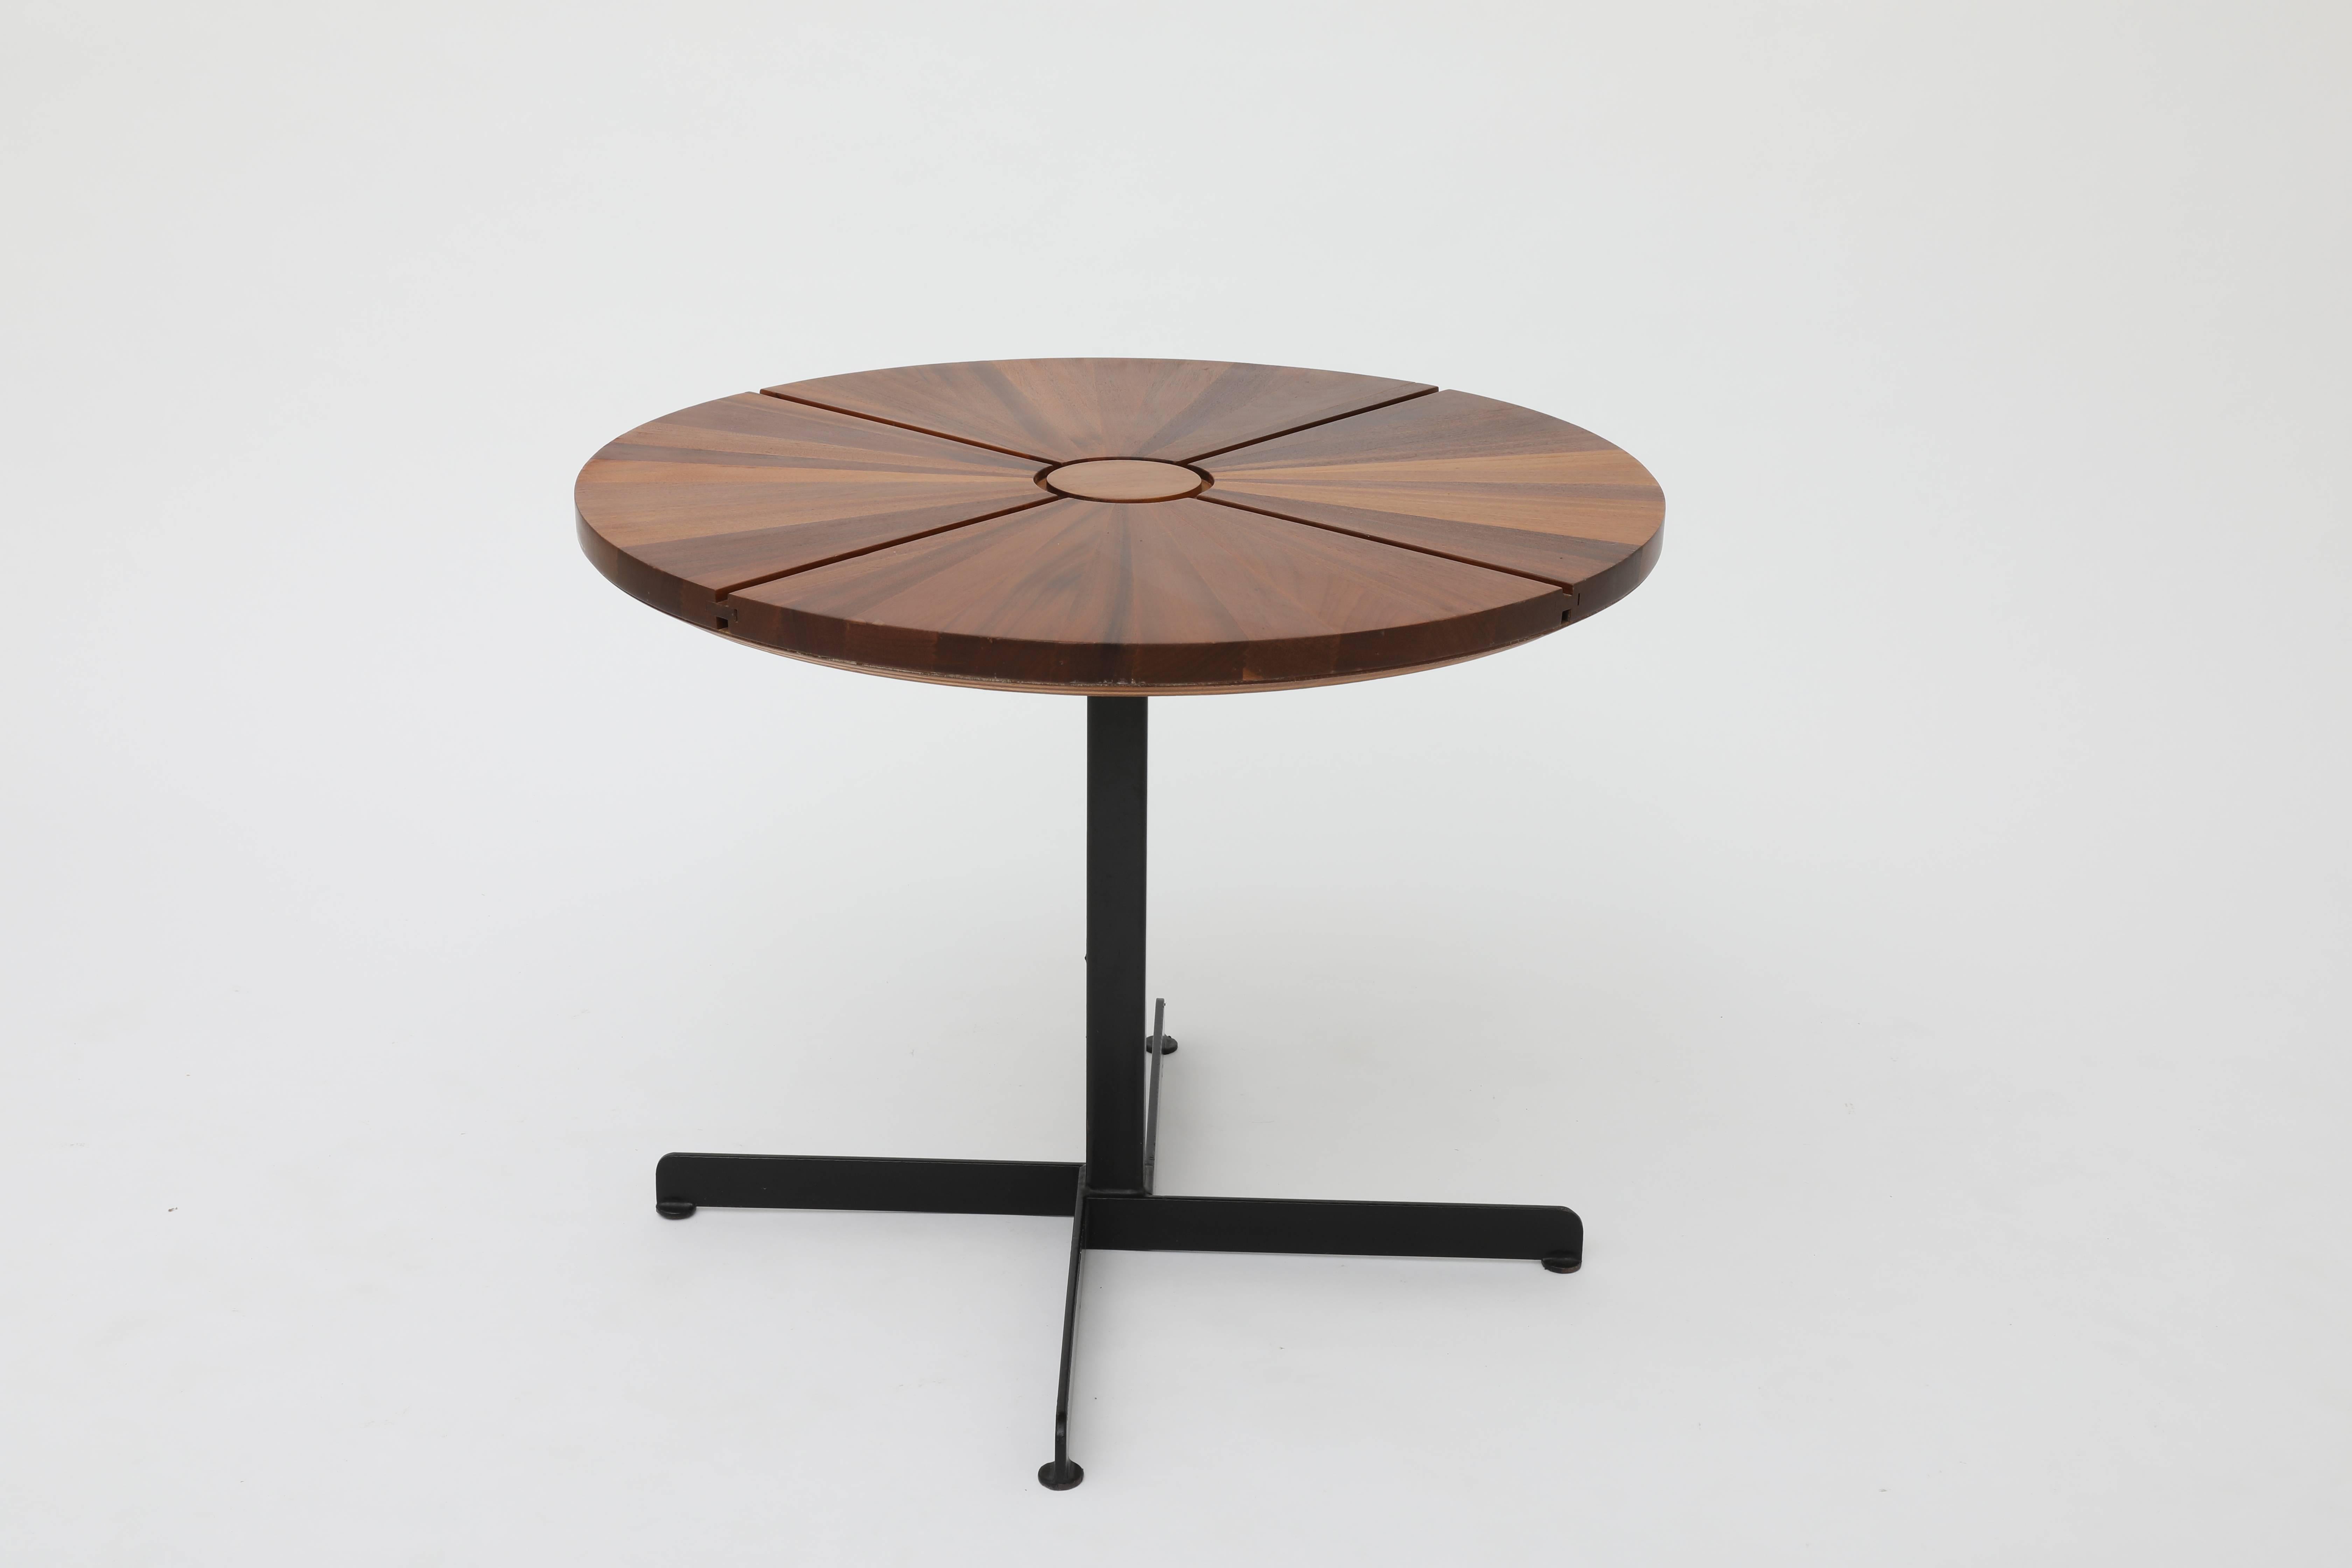 Charlotte Perriand, table ronde, vers 1970
Rare table réglable 